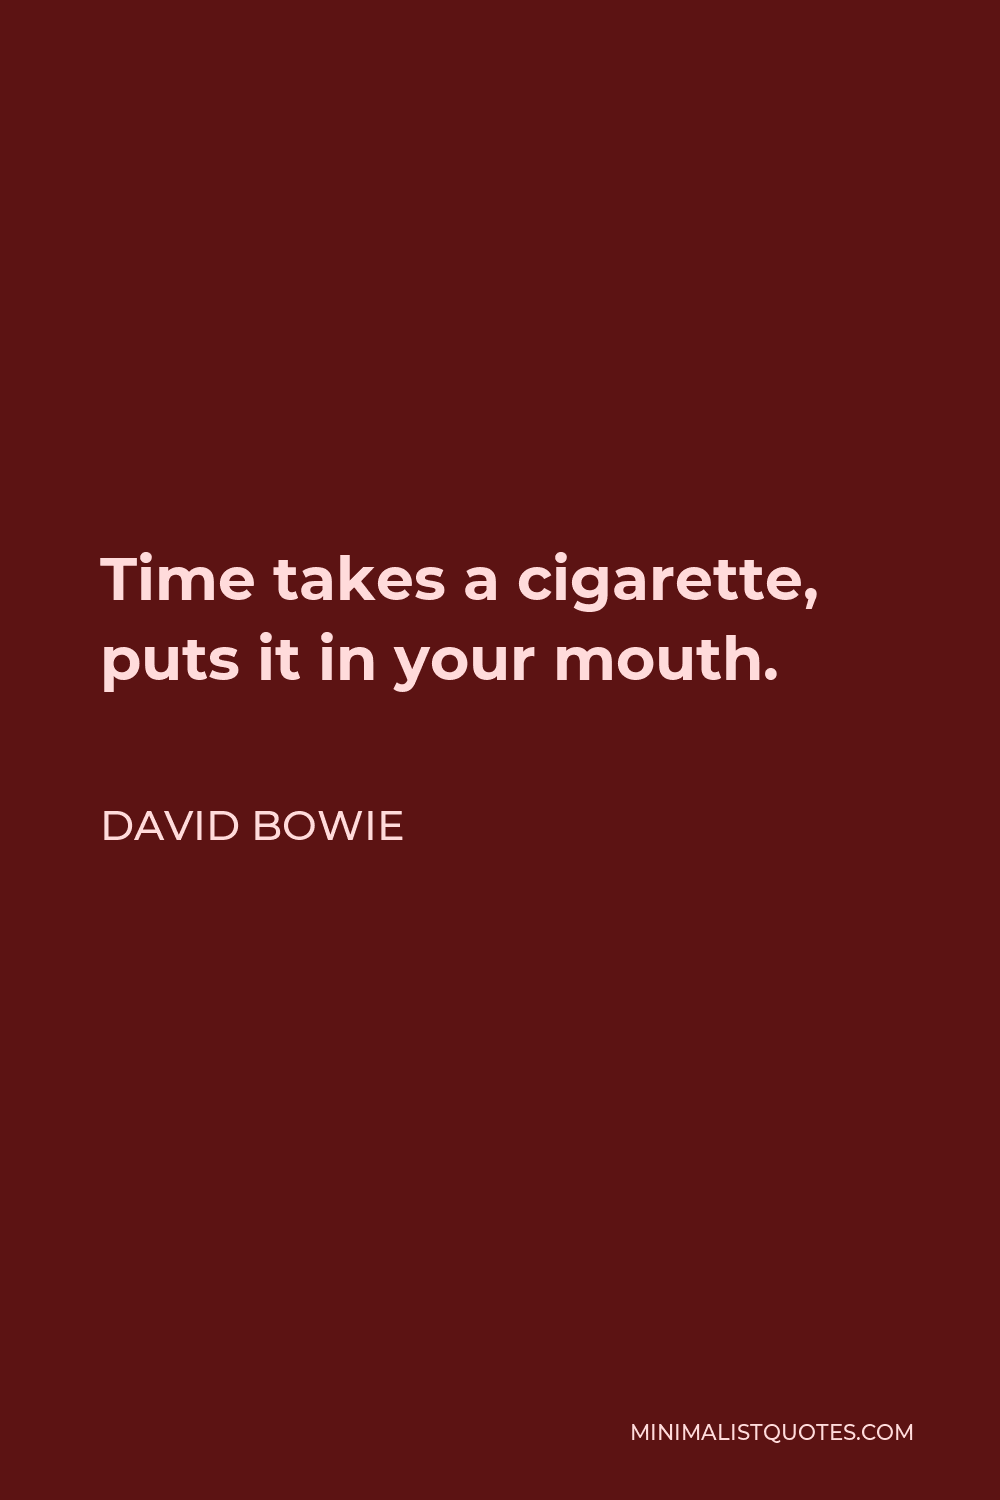 David Bowie Quote - Time takes a cigarette, puts it in your mouth.